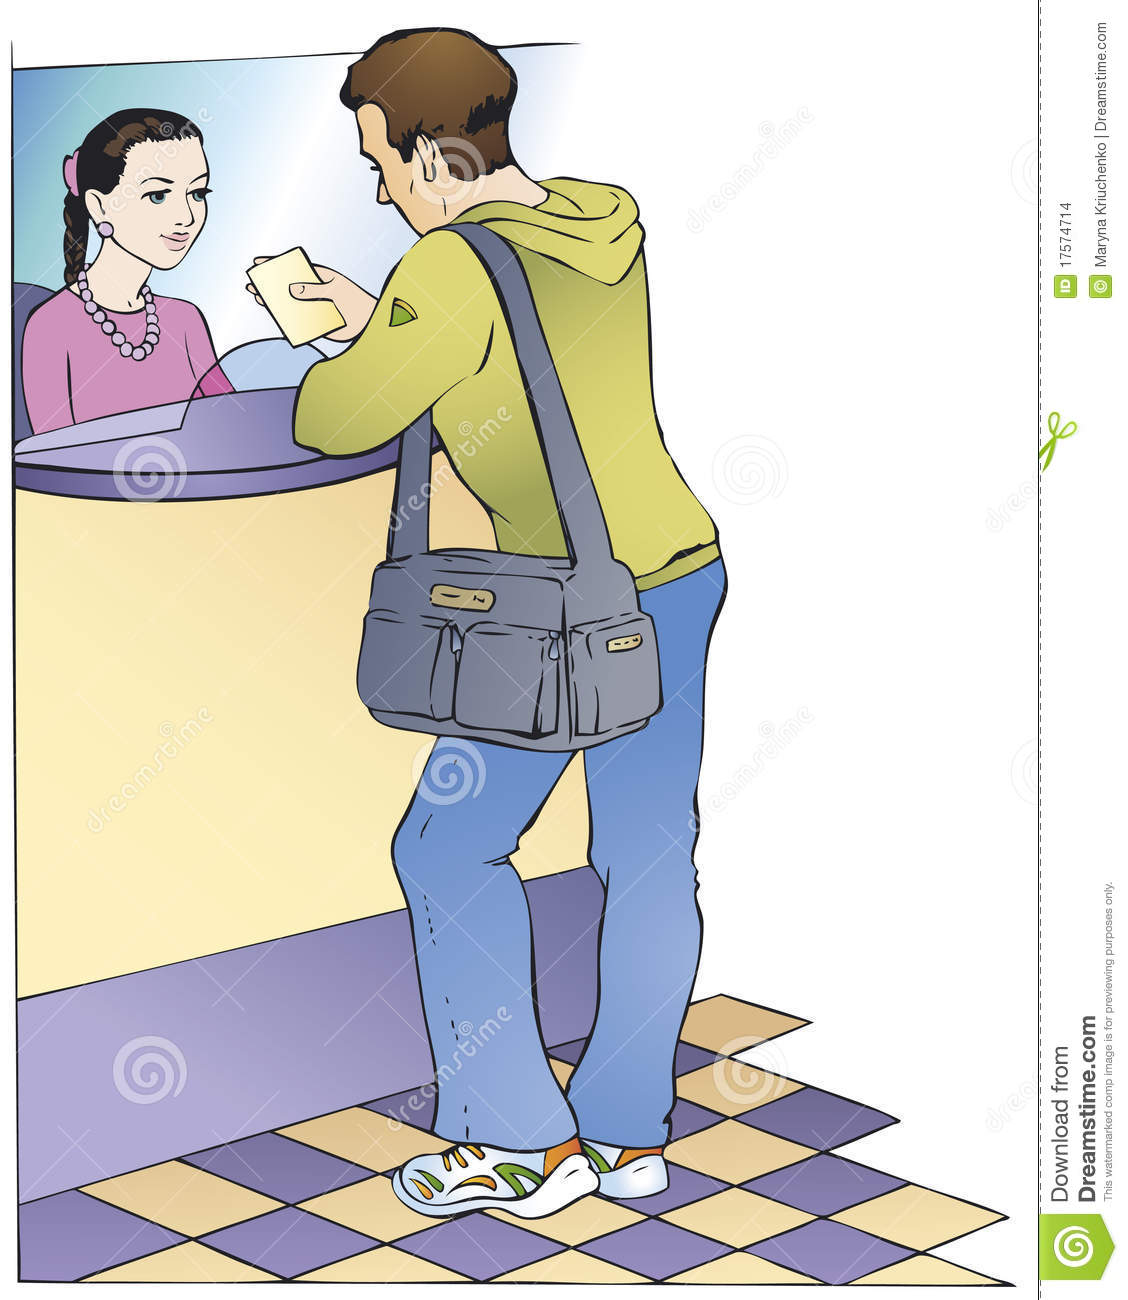     Between The Customer And Cashier Stock Images   Image  17574714